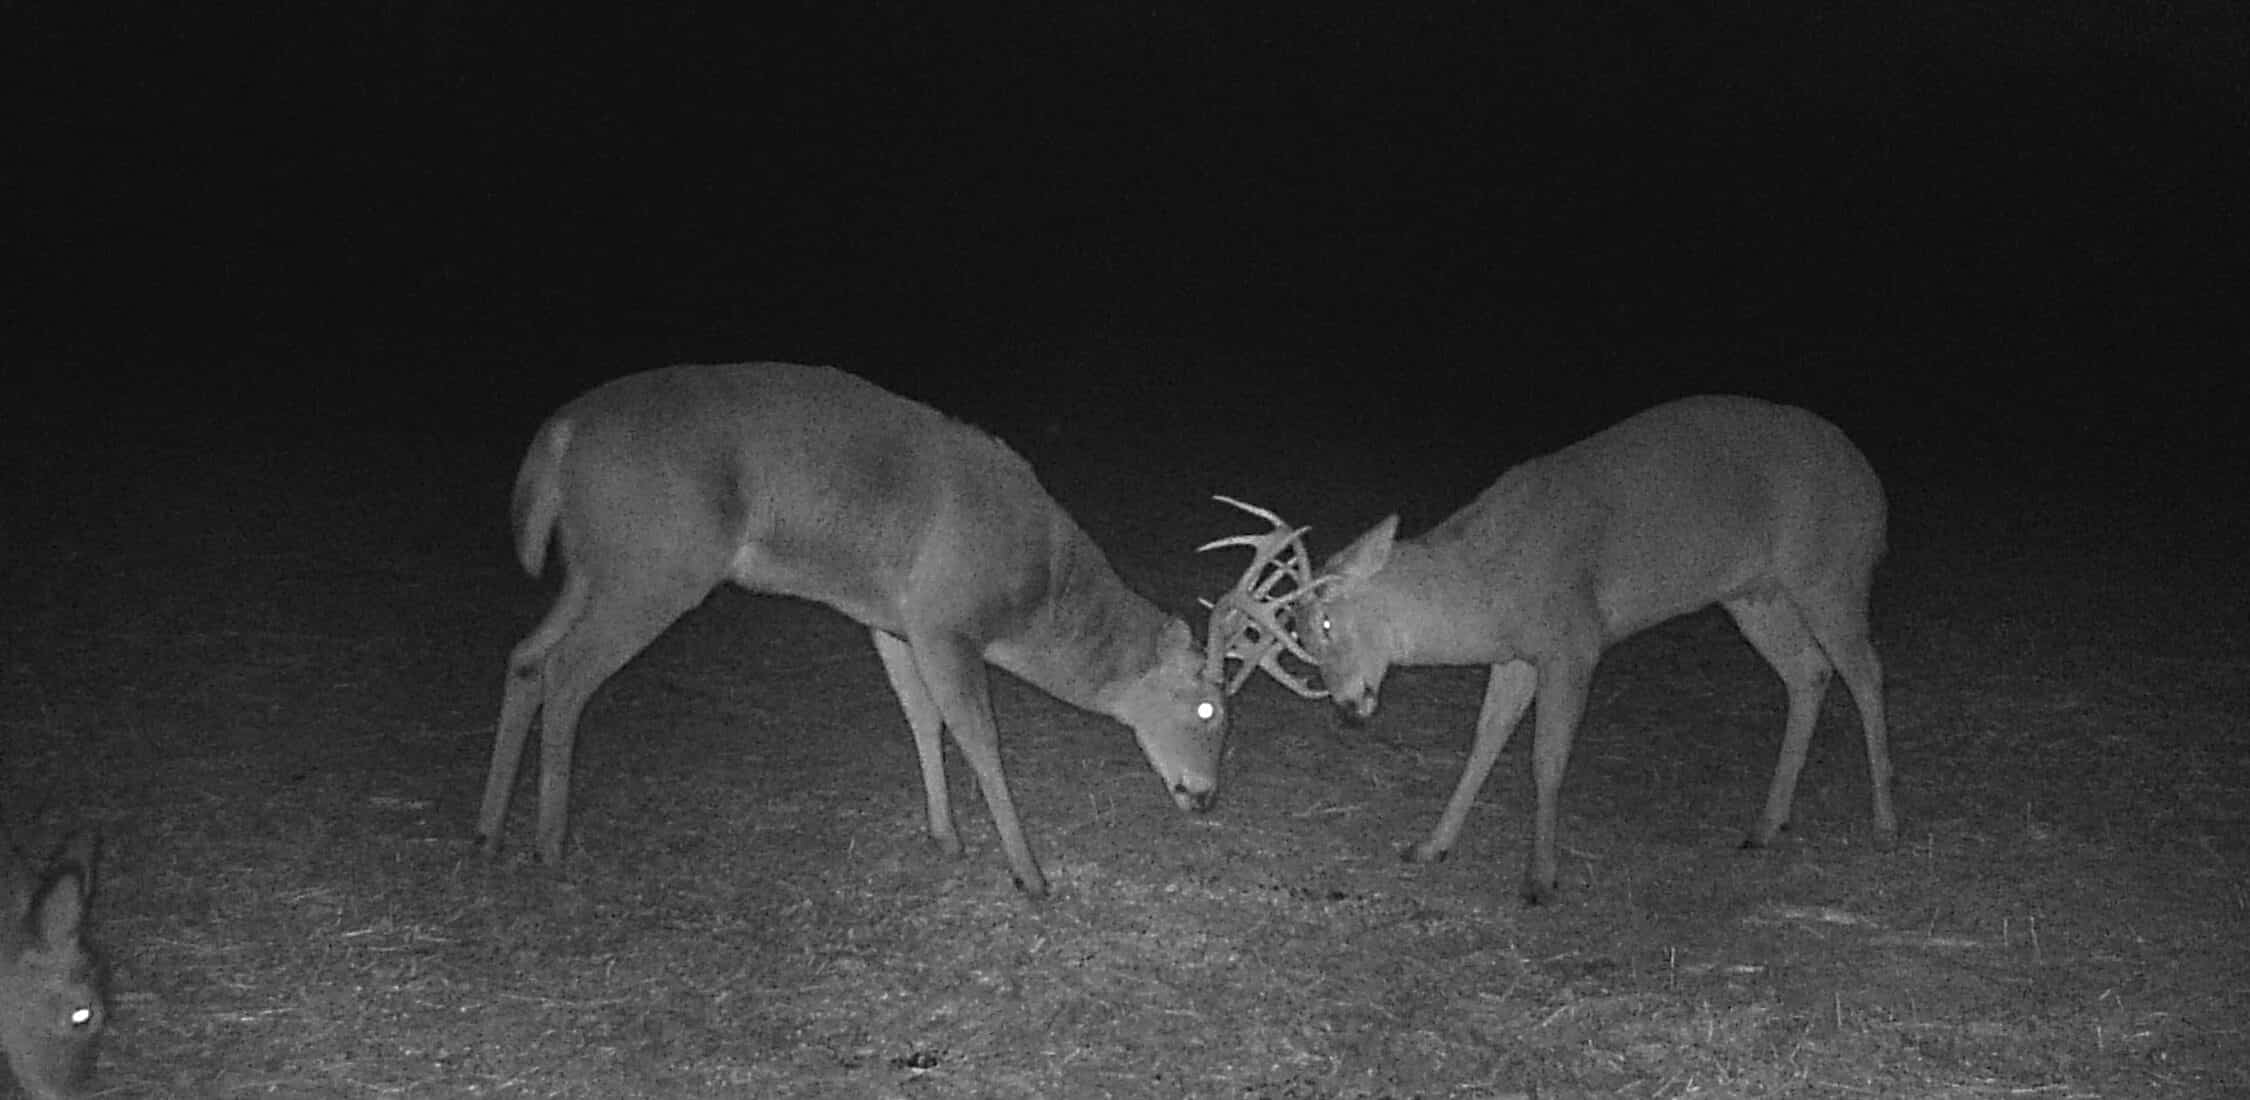 Deer at night hitting each other with their antlers